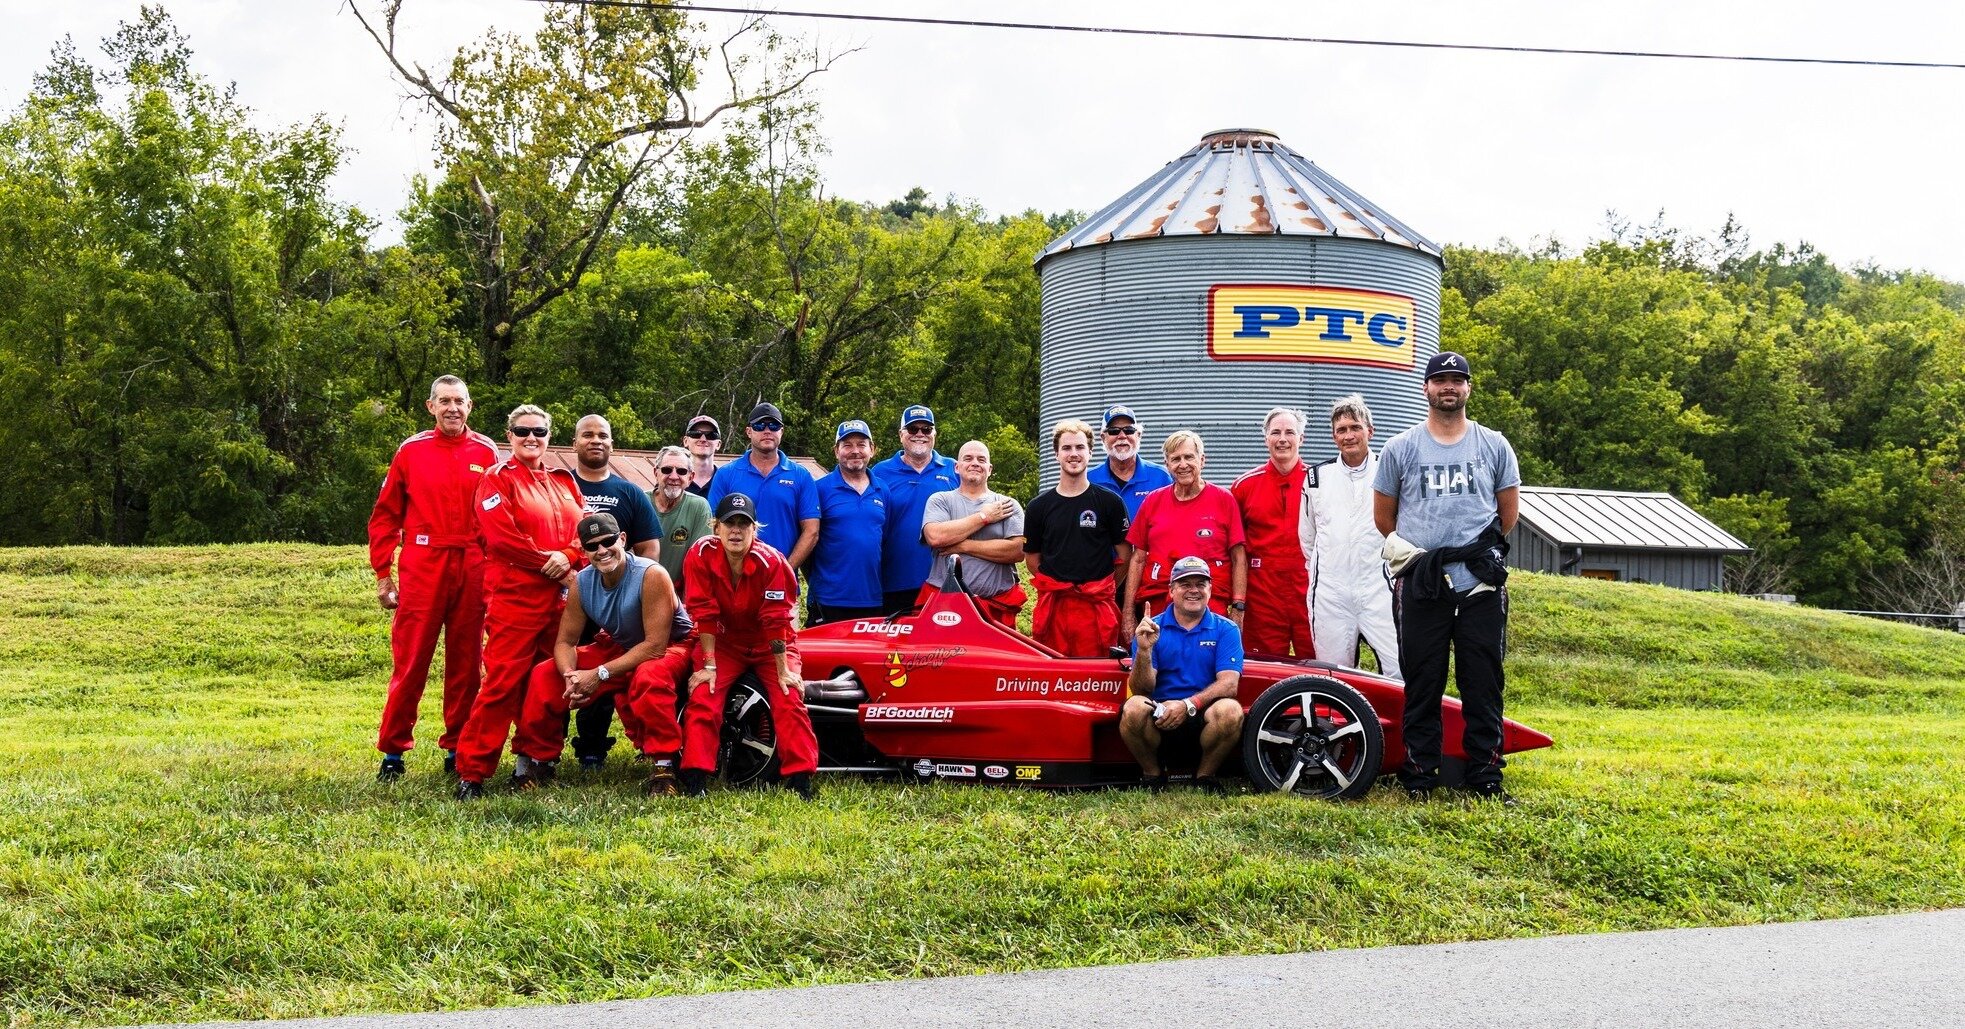 September&lsquo;s school was nothing short of wonderful! We had a great mix of new and experienced students setting fast lap times.

October 28/29 is our last school of the year. Head over to our website to get signed up! 

www.ptcdriving.com

Thank 